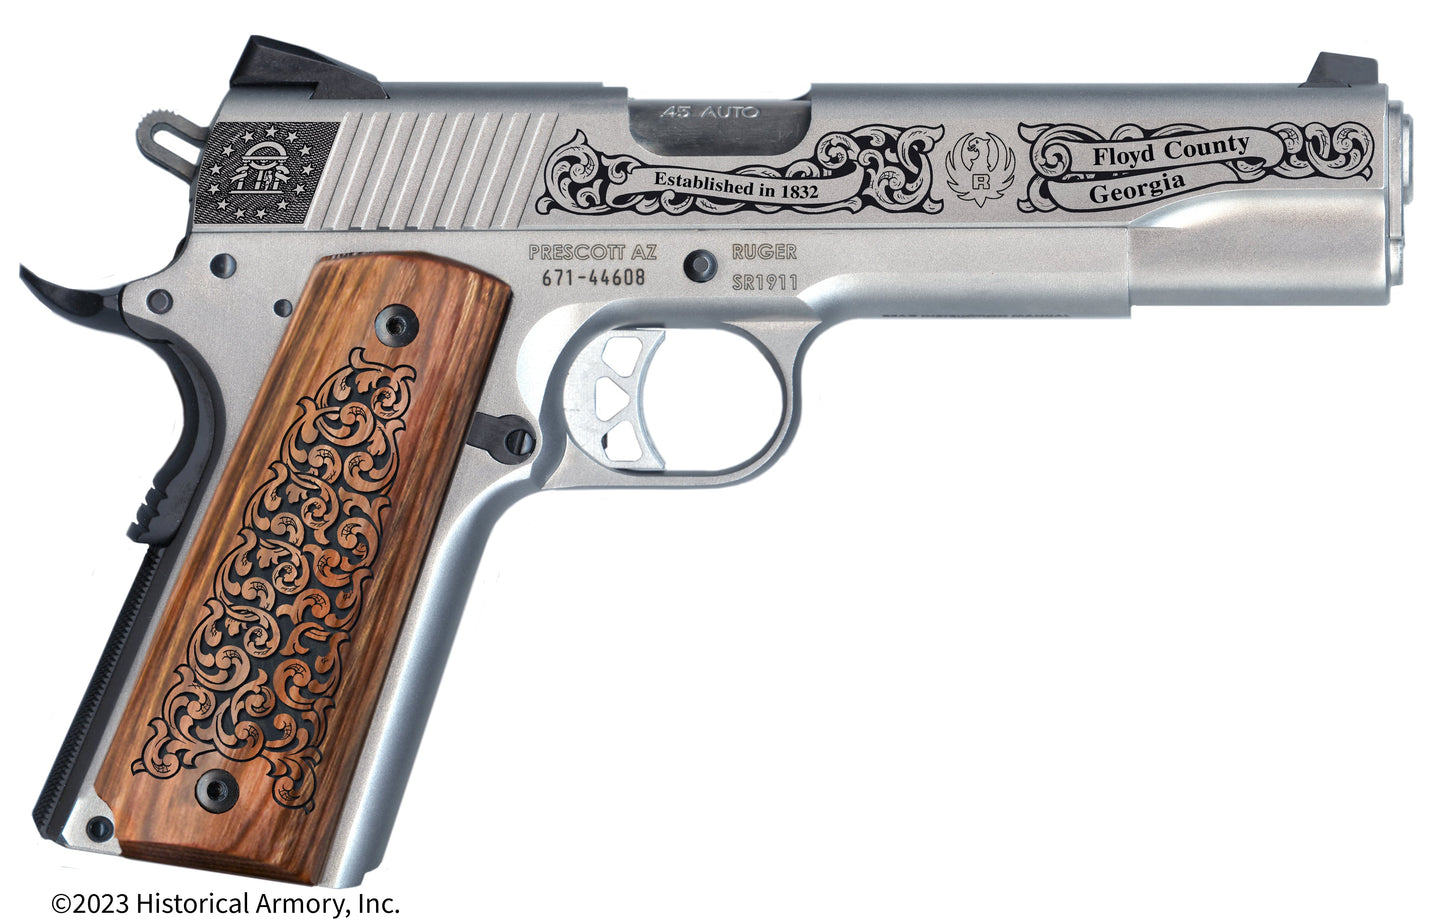 Floyd County Georgia Engraved .45 Auto Ruger 1911